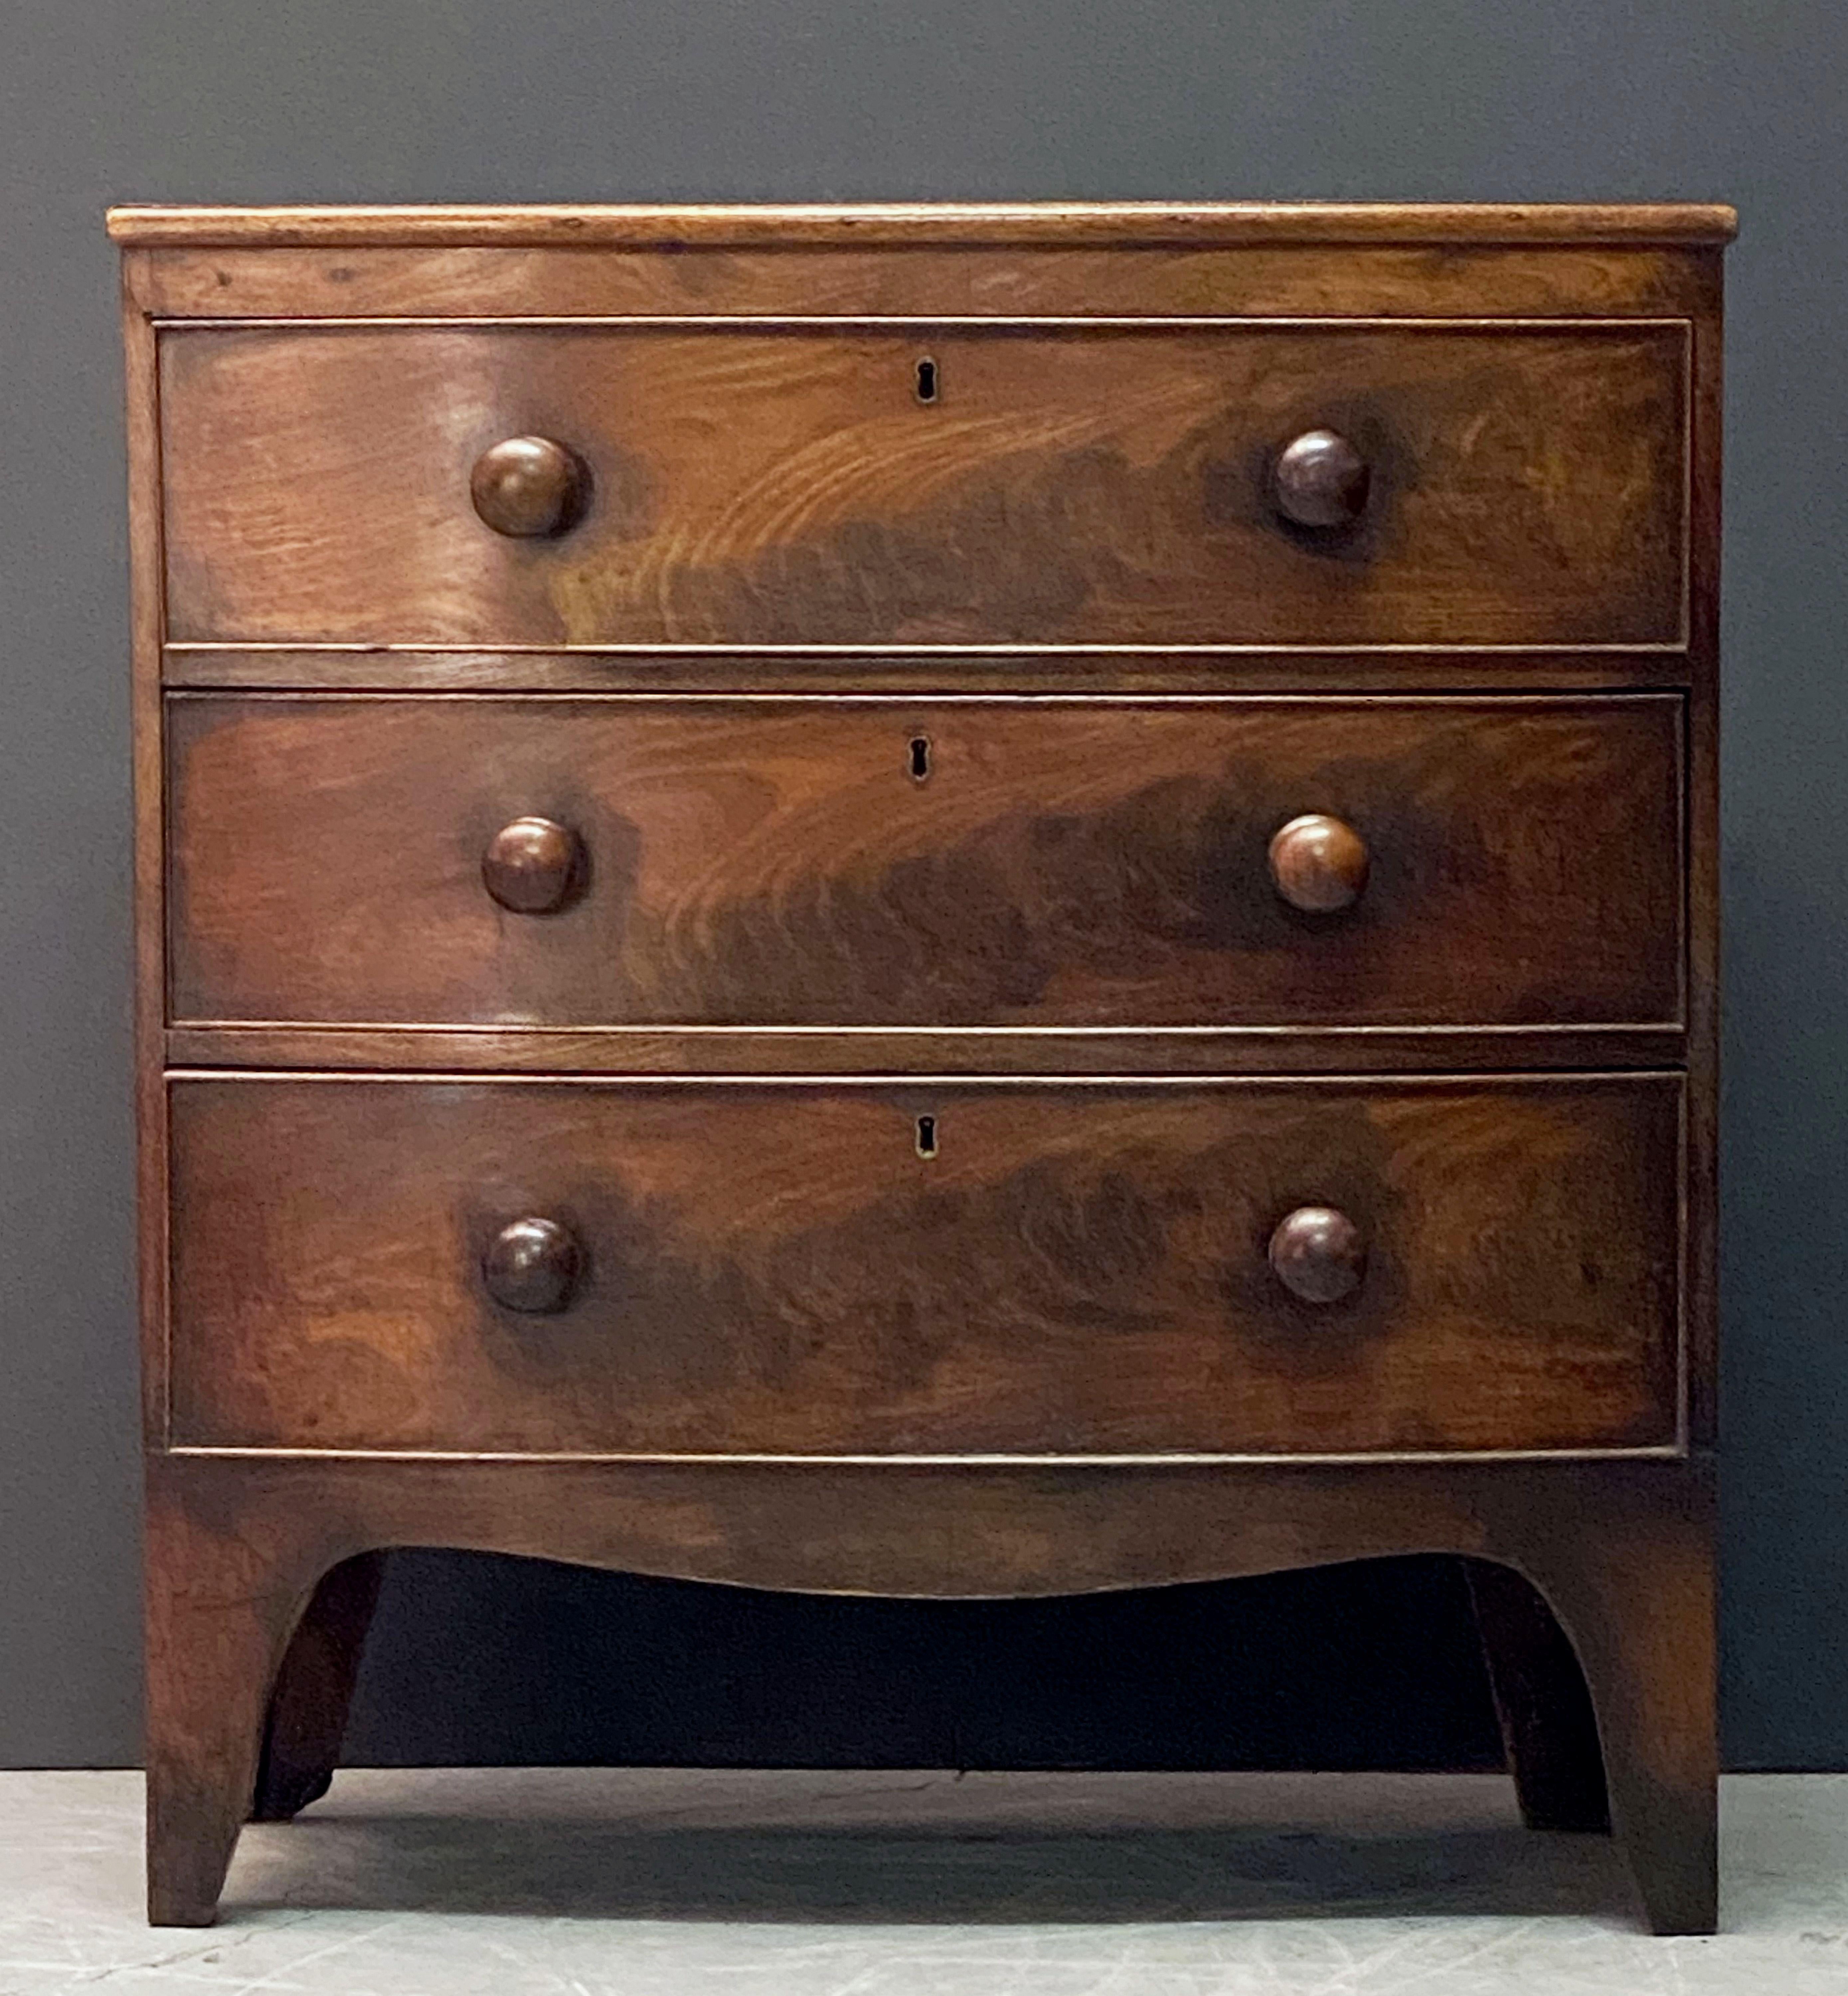 A handsome English bow-front small chest of drawers of mahogany from the 19th century - featuring a bowed top over a frieze of three beaded long drawers, each drawer with fine mahogany veneers, knob pulls, and brass escutcheons, and set upon a